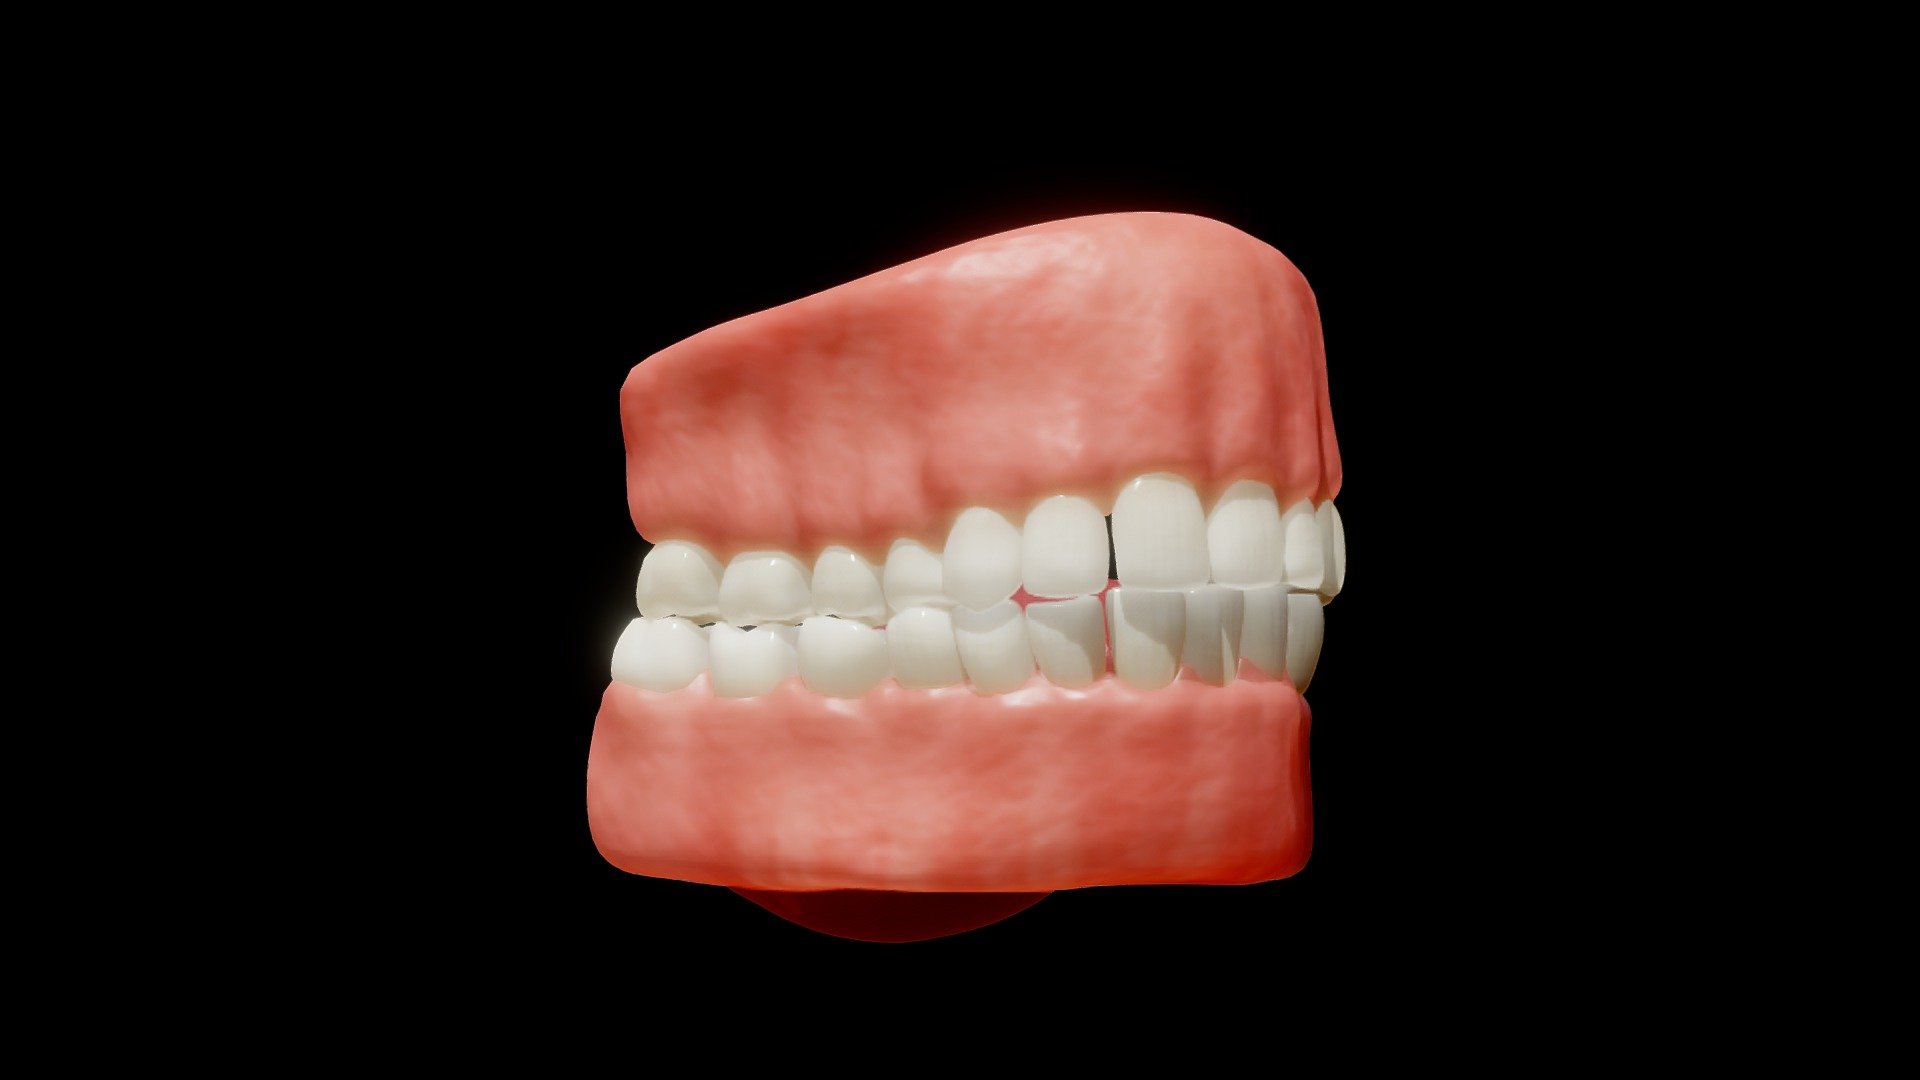 Originally modeled in Zbrush2021



Advanced Format C4D
Other Format OBJ STL 3DS FBX + Scene render Marmoset Toolbag 4



Mouth Teeth texture :
- BaseColor
- Metallic
- Roughness
- Normal
- Ambient Occlusion



SCALE:
- Model at world center and real scale:
       Metric in centimeter
       1 unit = 1 centimeter



Texture resolution 4096x4096



Poly Count :
Polygon Count - 48850
Vertex Count - 24487
No N-Gons - Human Mouth Animation - Buy Royalty Free 3D model by zames1992 3d model